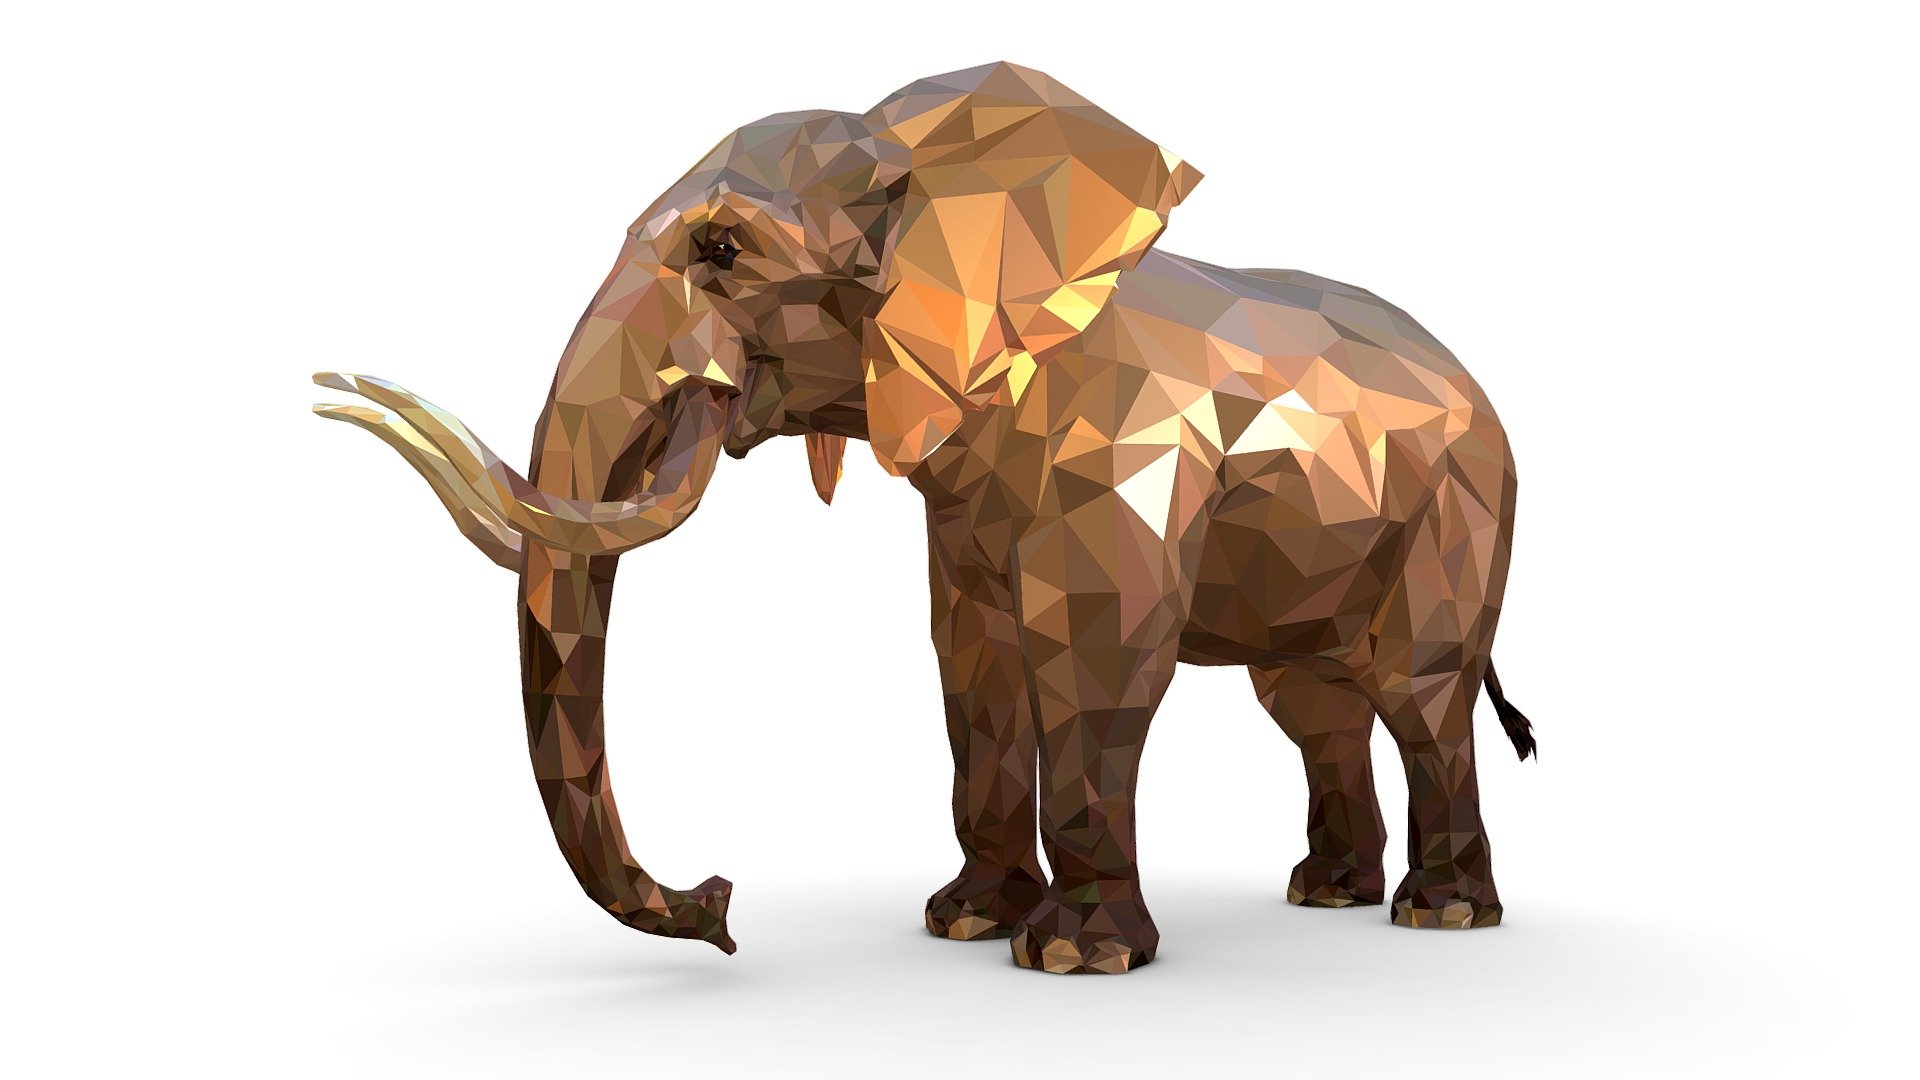 Support me on Patreon, please - https://www.patreon.com/art_book

For all questions on cooperation, leave a comment on any 3D model

Elephant Low Polygon Art African Animal low-poly 3d model ready for Virtual Reality (VR), Augmented Reality (AR), games and other real-time apps. 3d model of high quality, optimized for 3d engines, virtual reality, looks very stylish and attractive 3d model